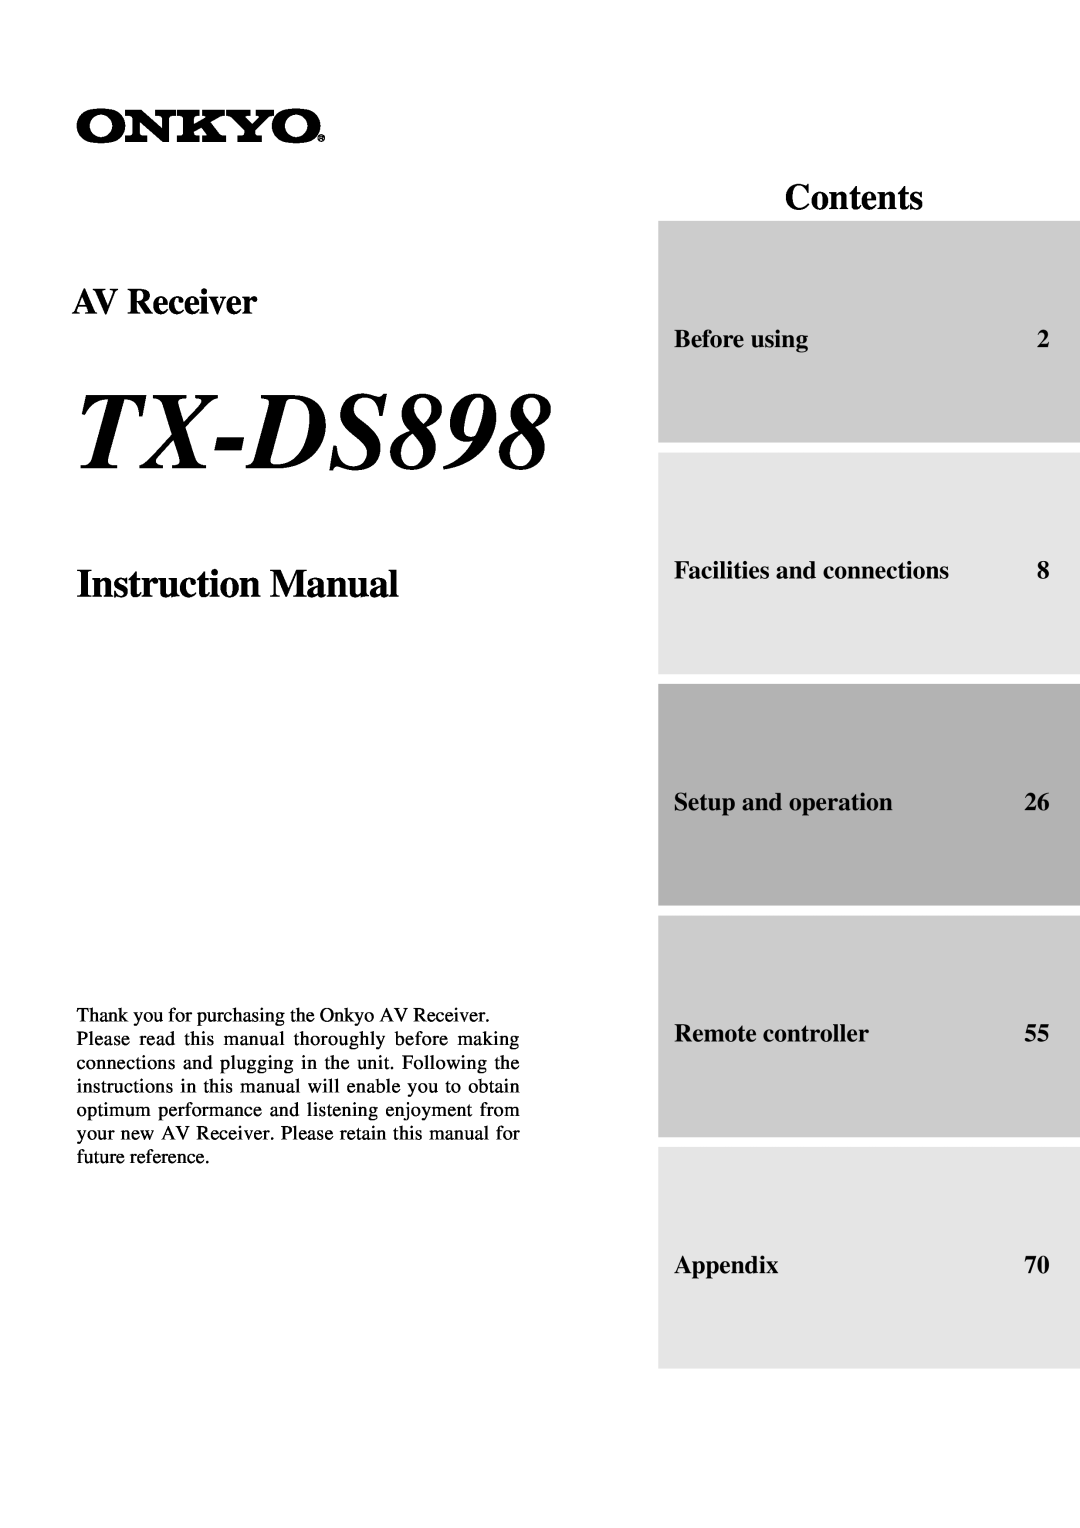 Onkyo TX-DS898 instruction manual Contents AV Receiver, Before using, Facilities and connections, Setup and operation 